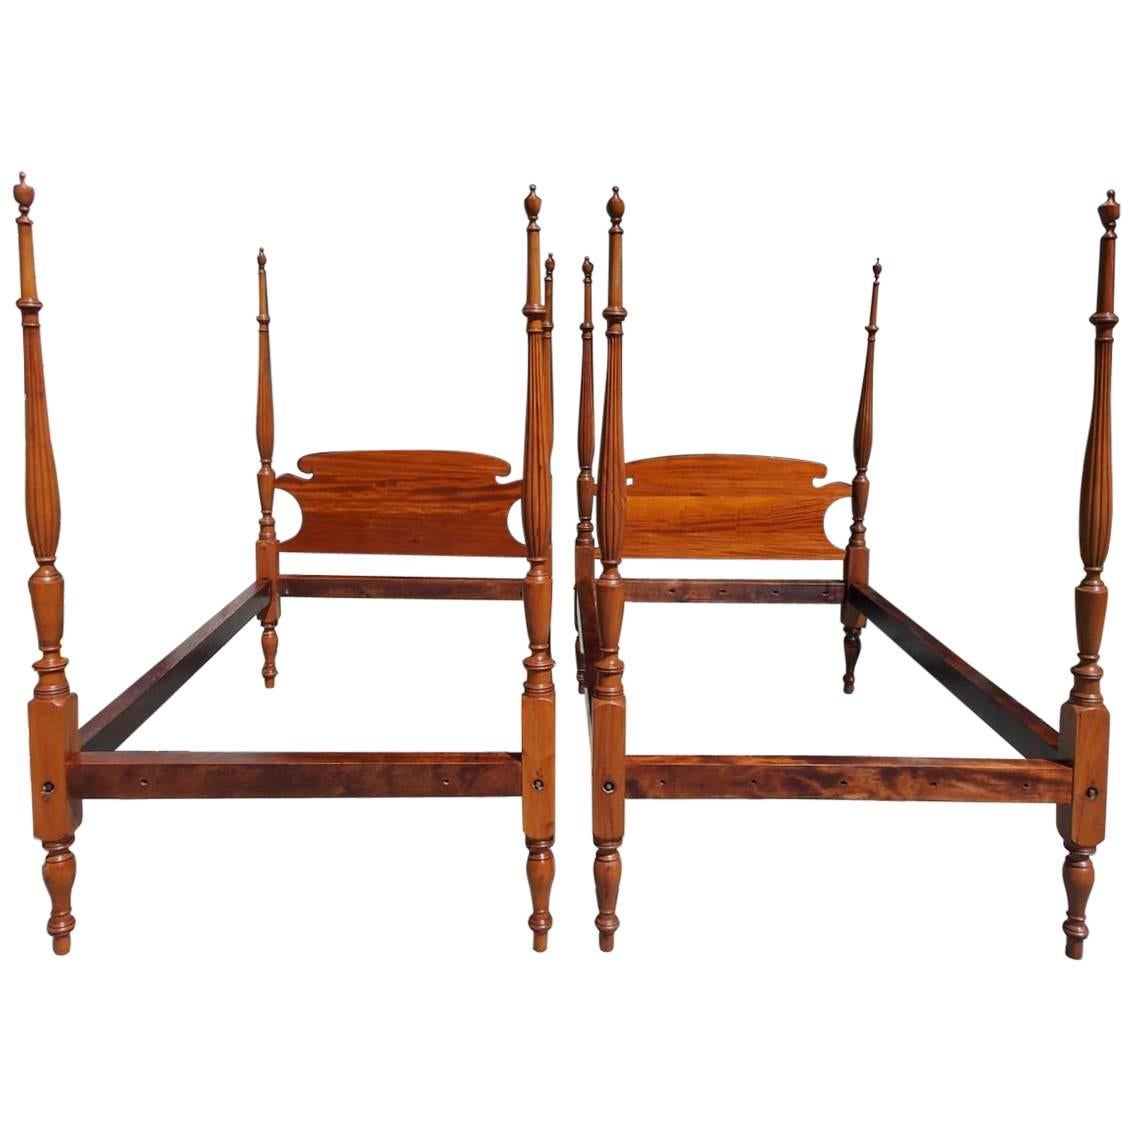 Pair of American Sheraton Mahogany Four-Poster Reeded Twin Beds, Circa 1820